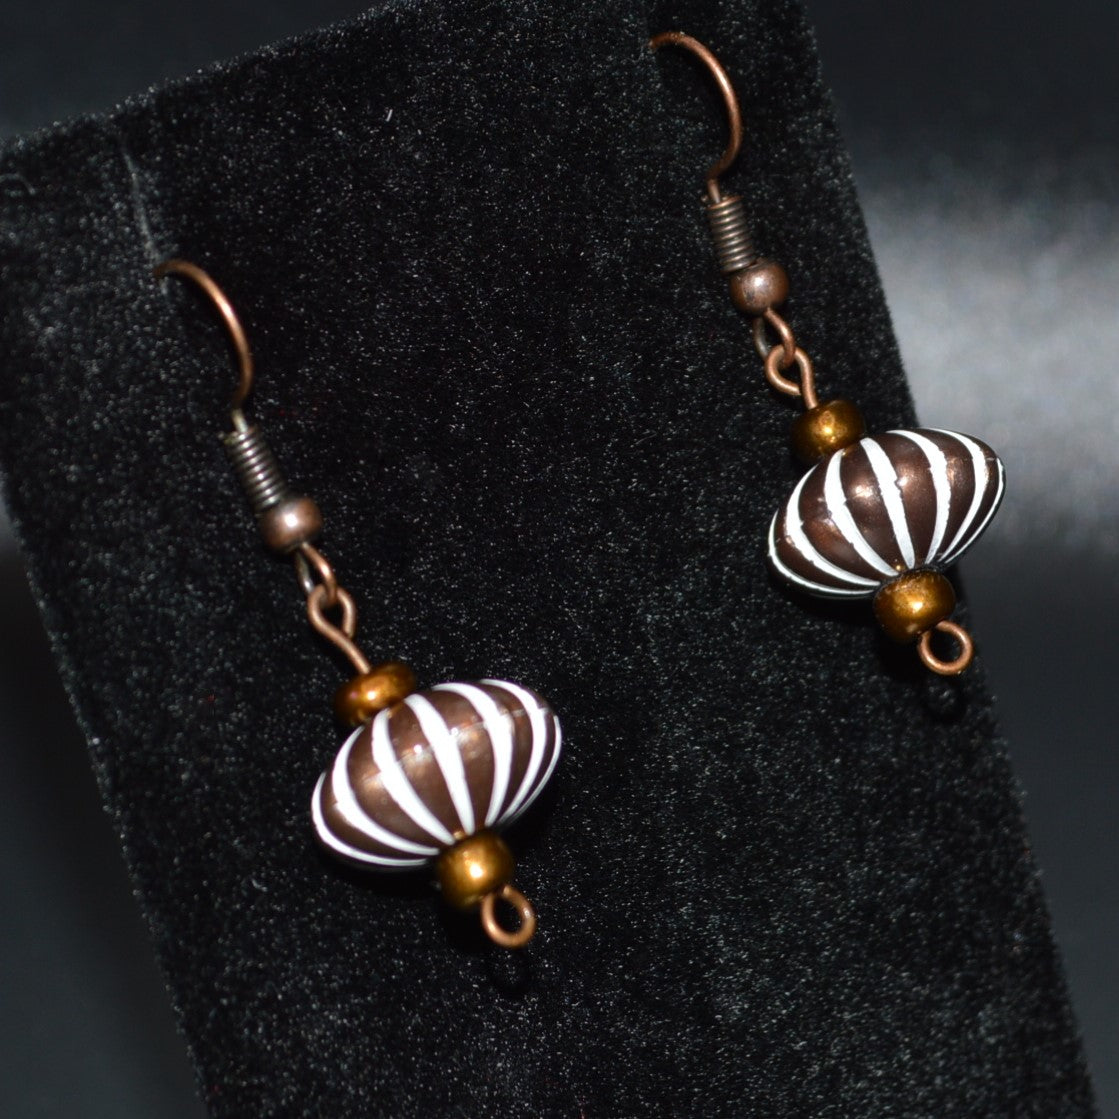 Bronze and White Striped Earrings